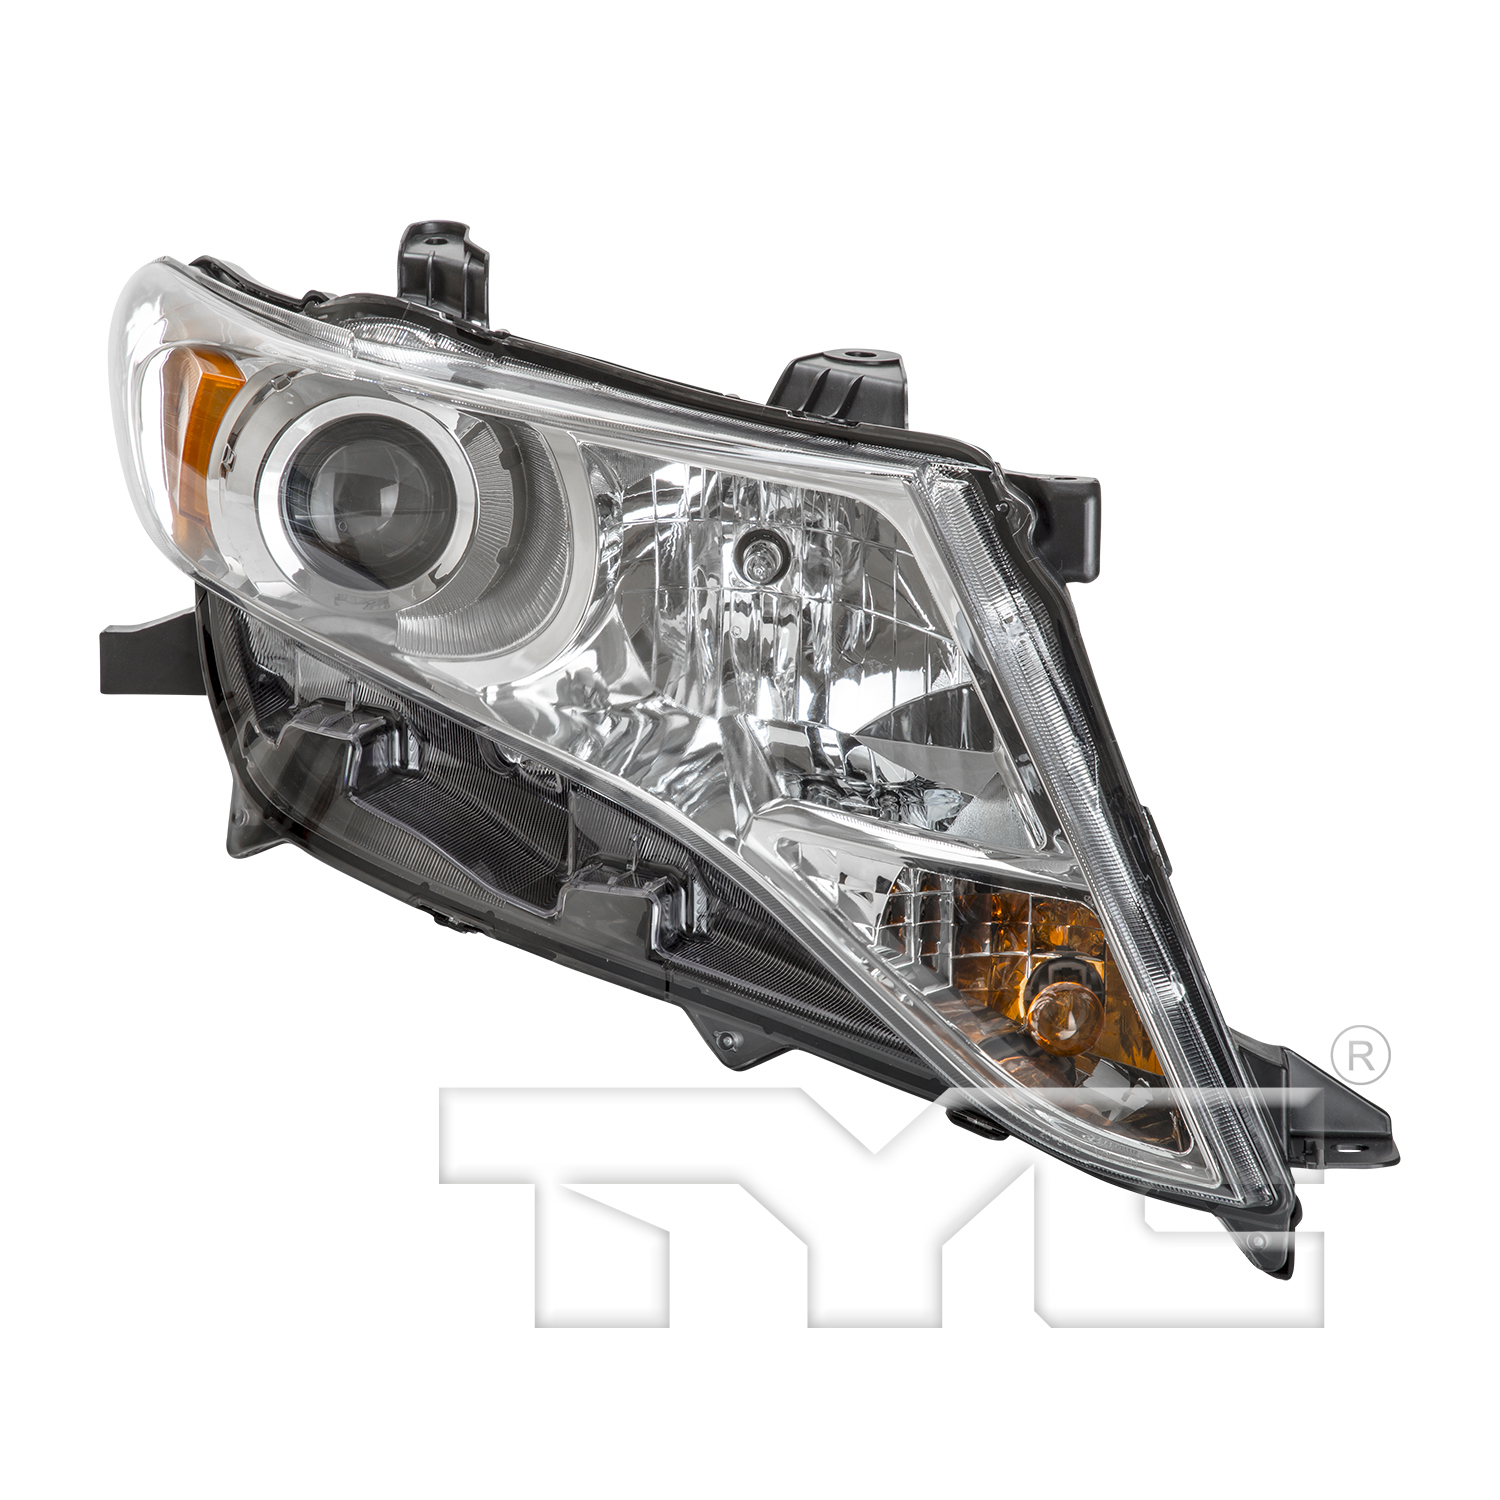 Aftermarket HEADLIGHTS for TOYOTA - VENZA, VENZA,09-16,RT Headlamp assy composite